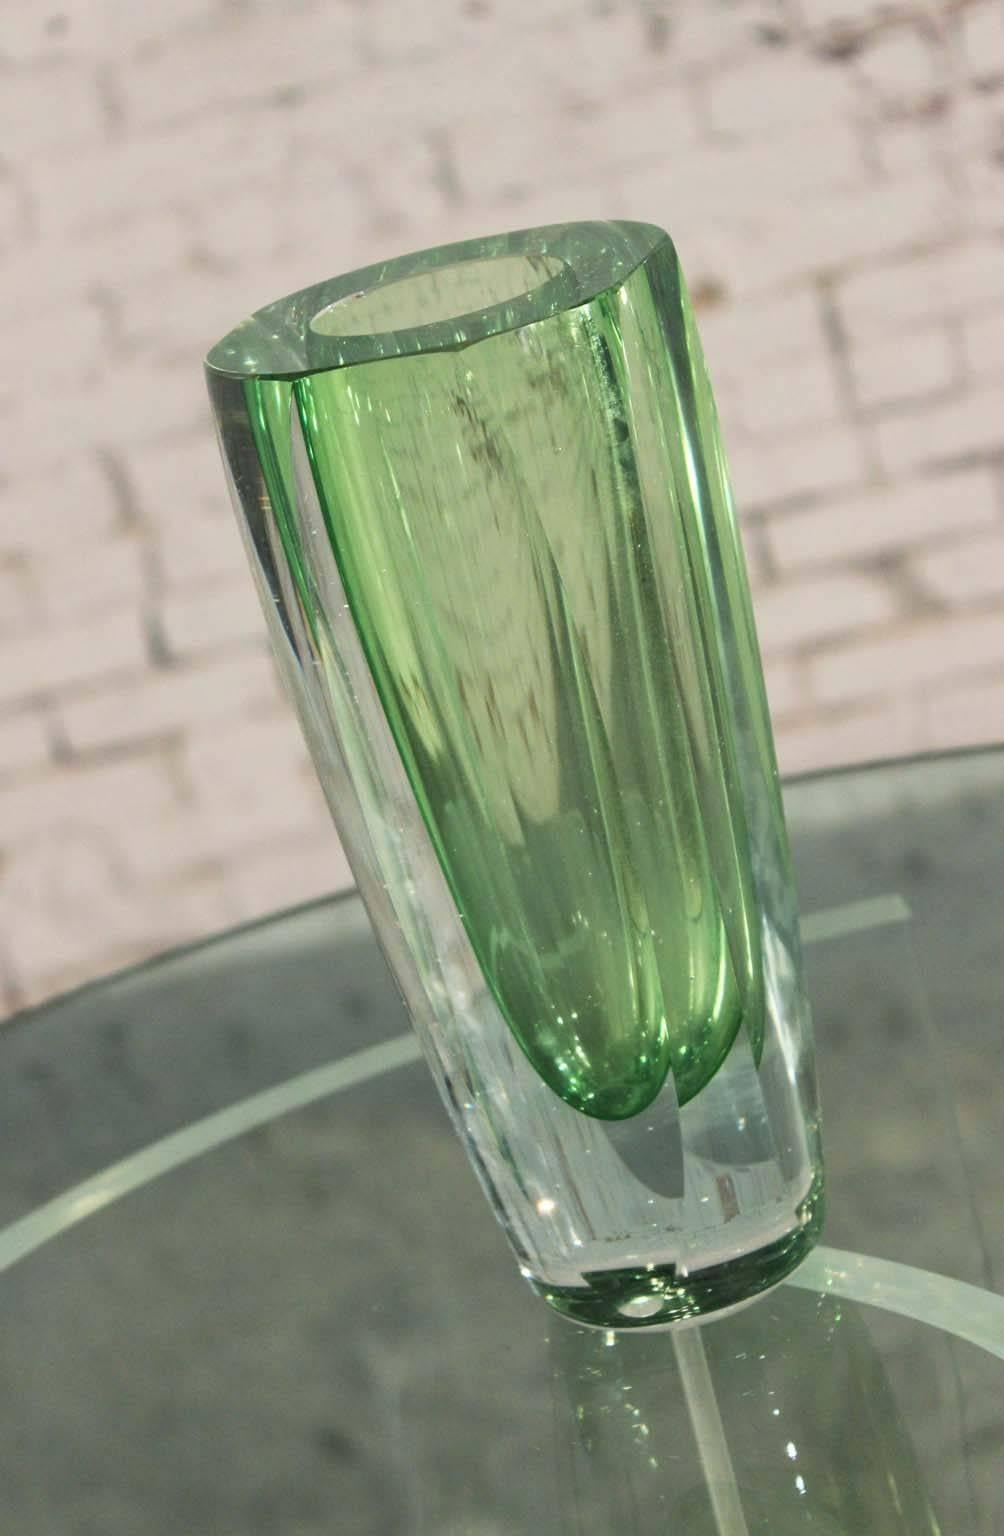 Gorgeous green and very thick and heavy sommerso and faceted vintage MCM Murano glass vase, circa 1960 and attributed to Flavio Poli for Seguso. Condition is good vintage with one small chip to inner rim that can easily be polished out.

Just